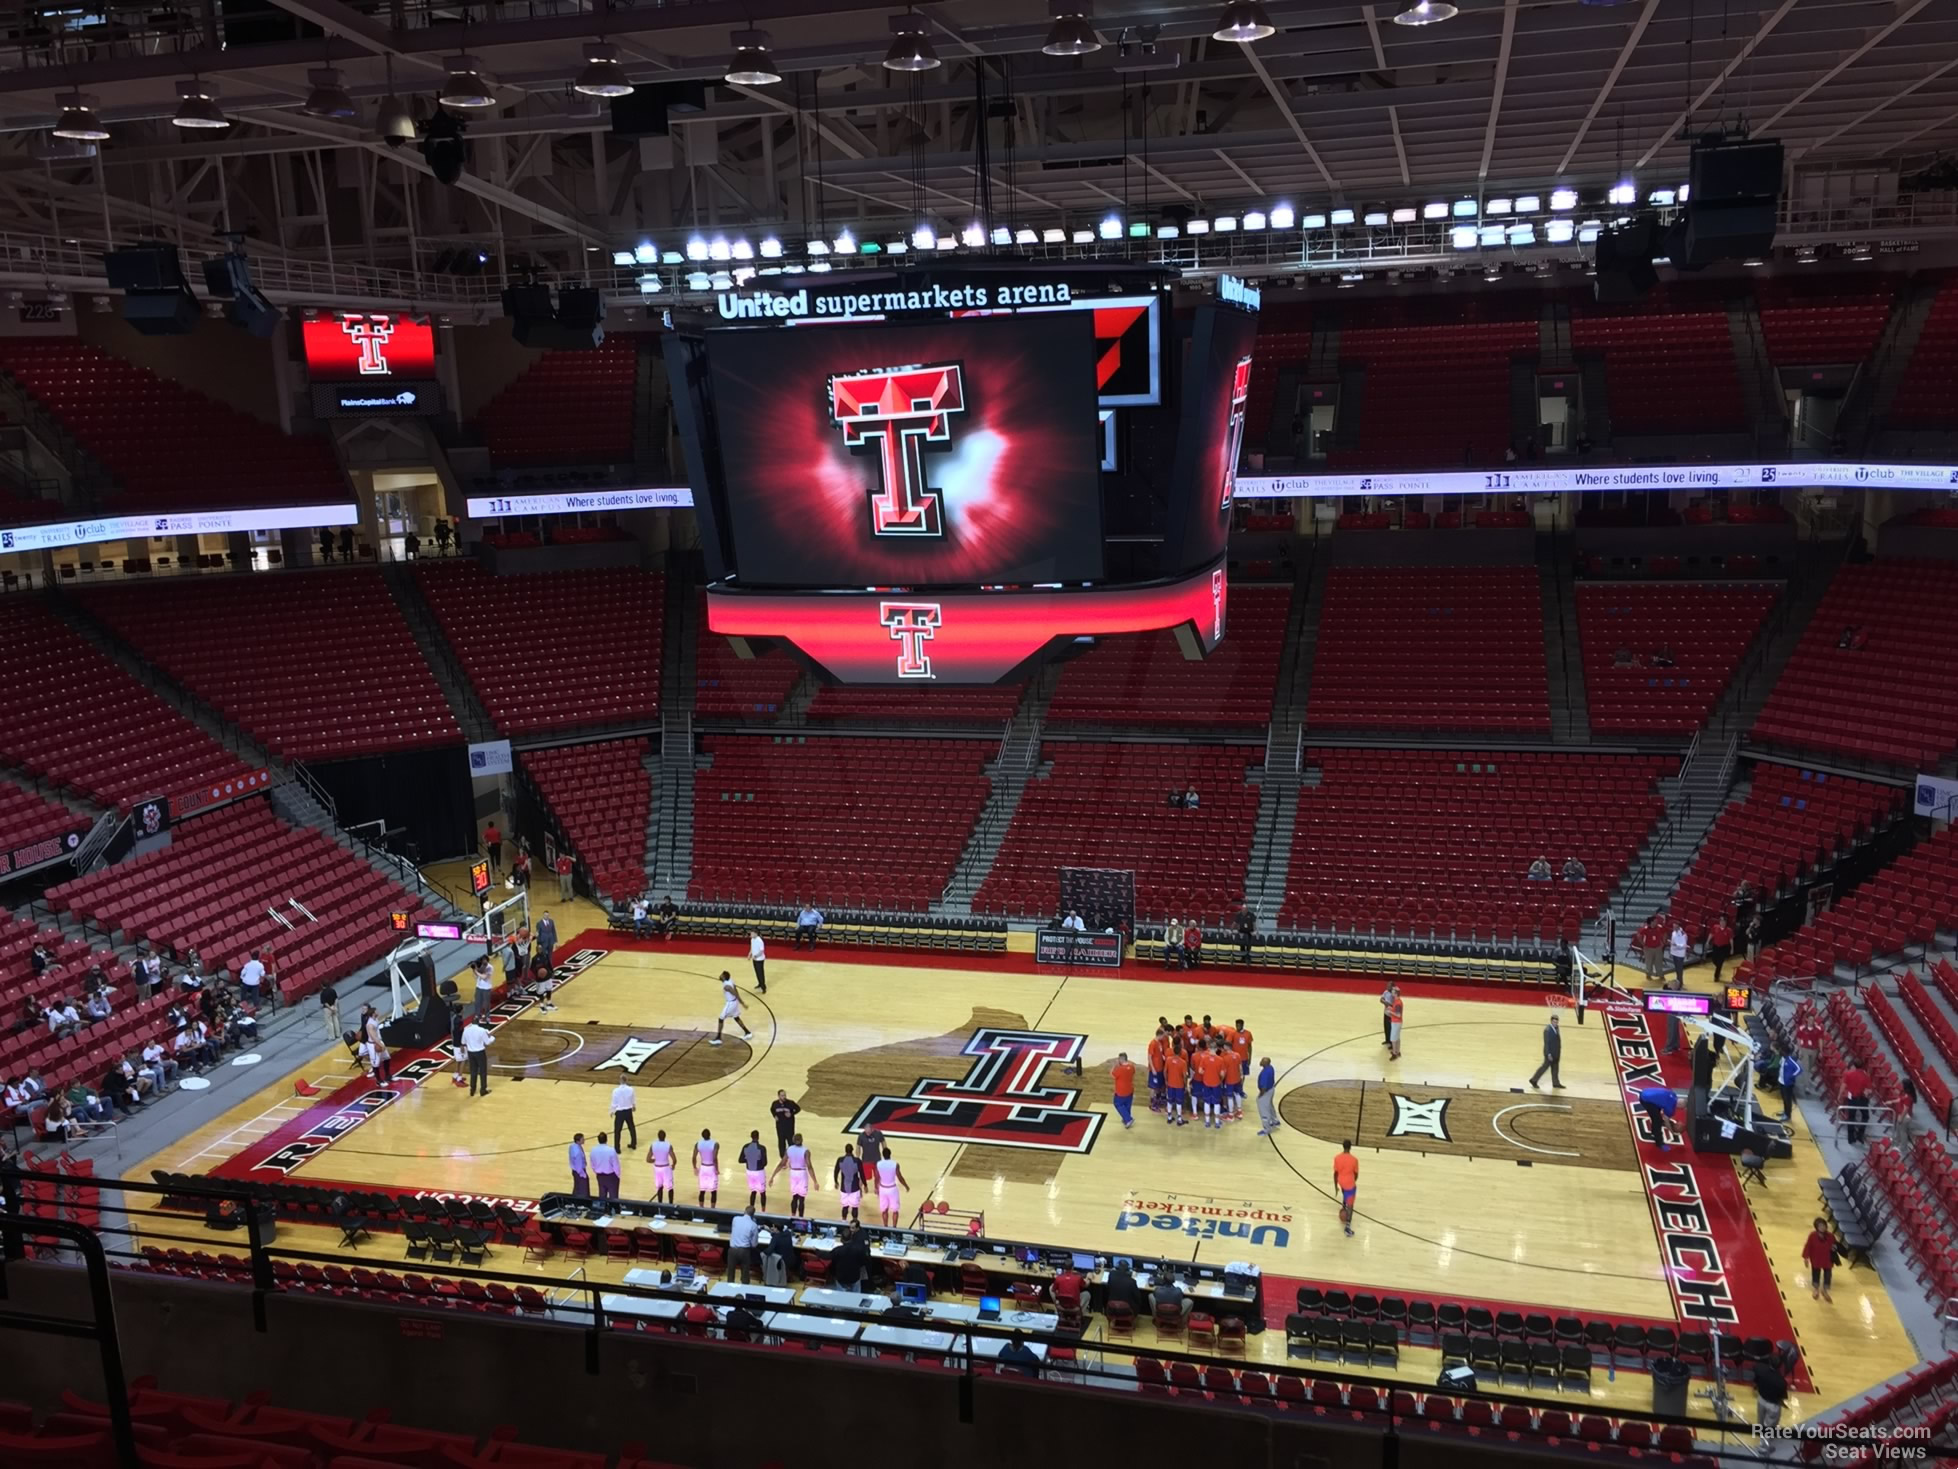 section 216, row 7 seat view  - united supermarkets arena